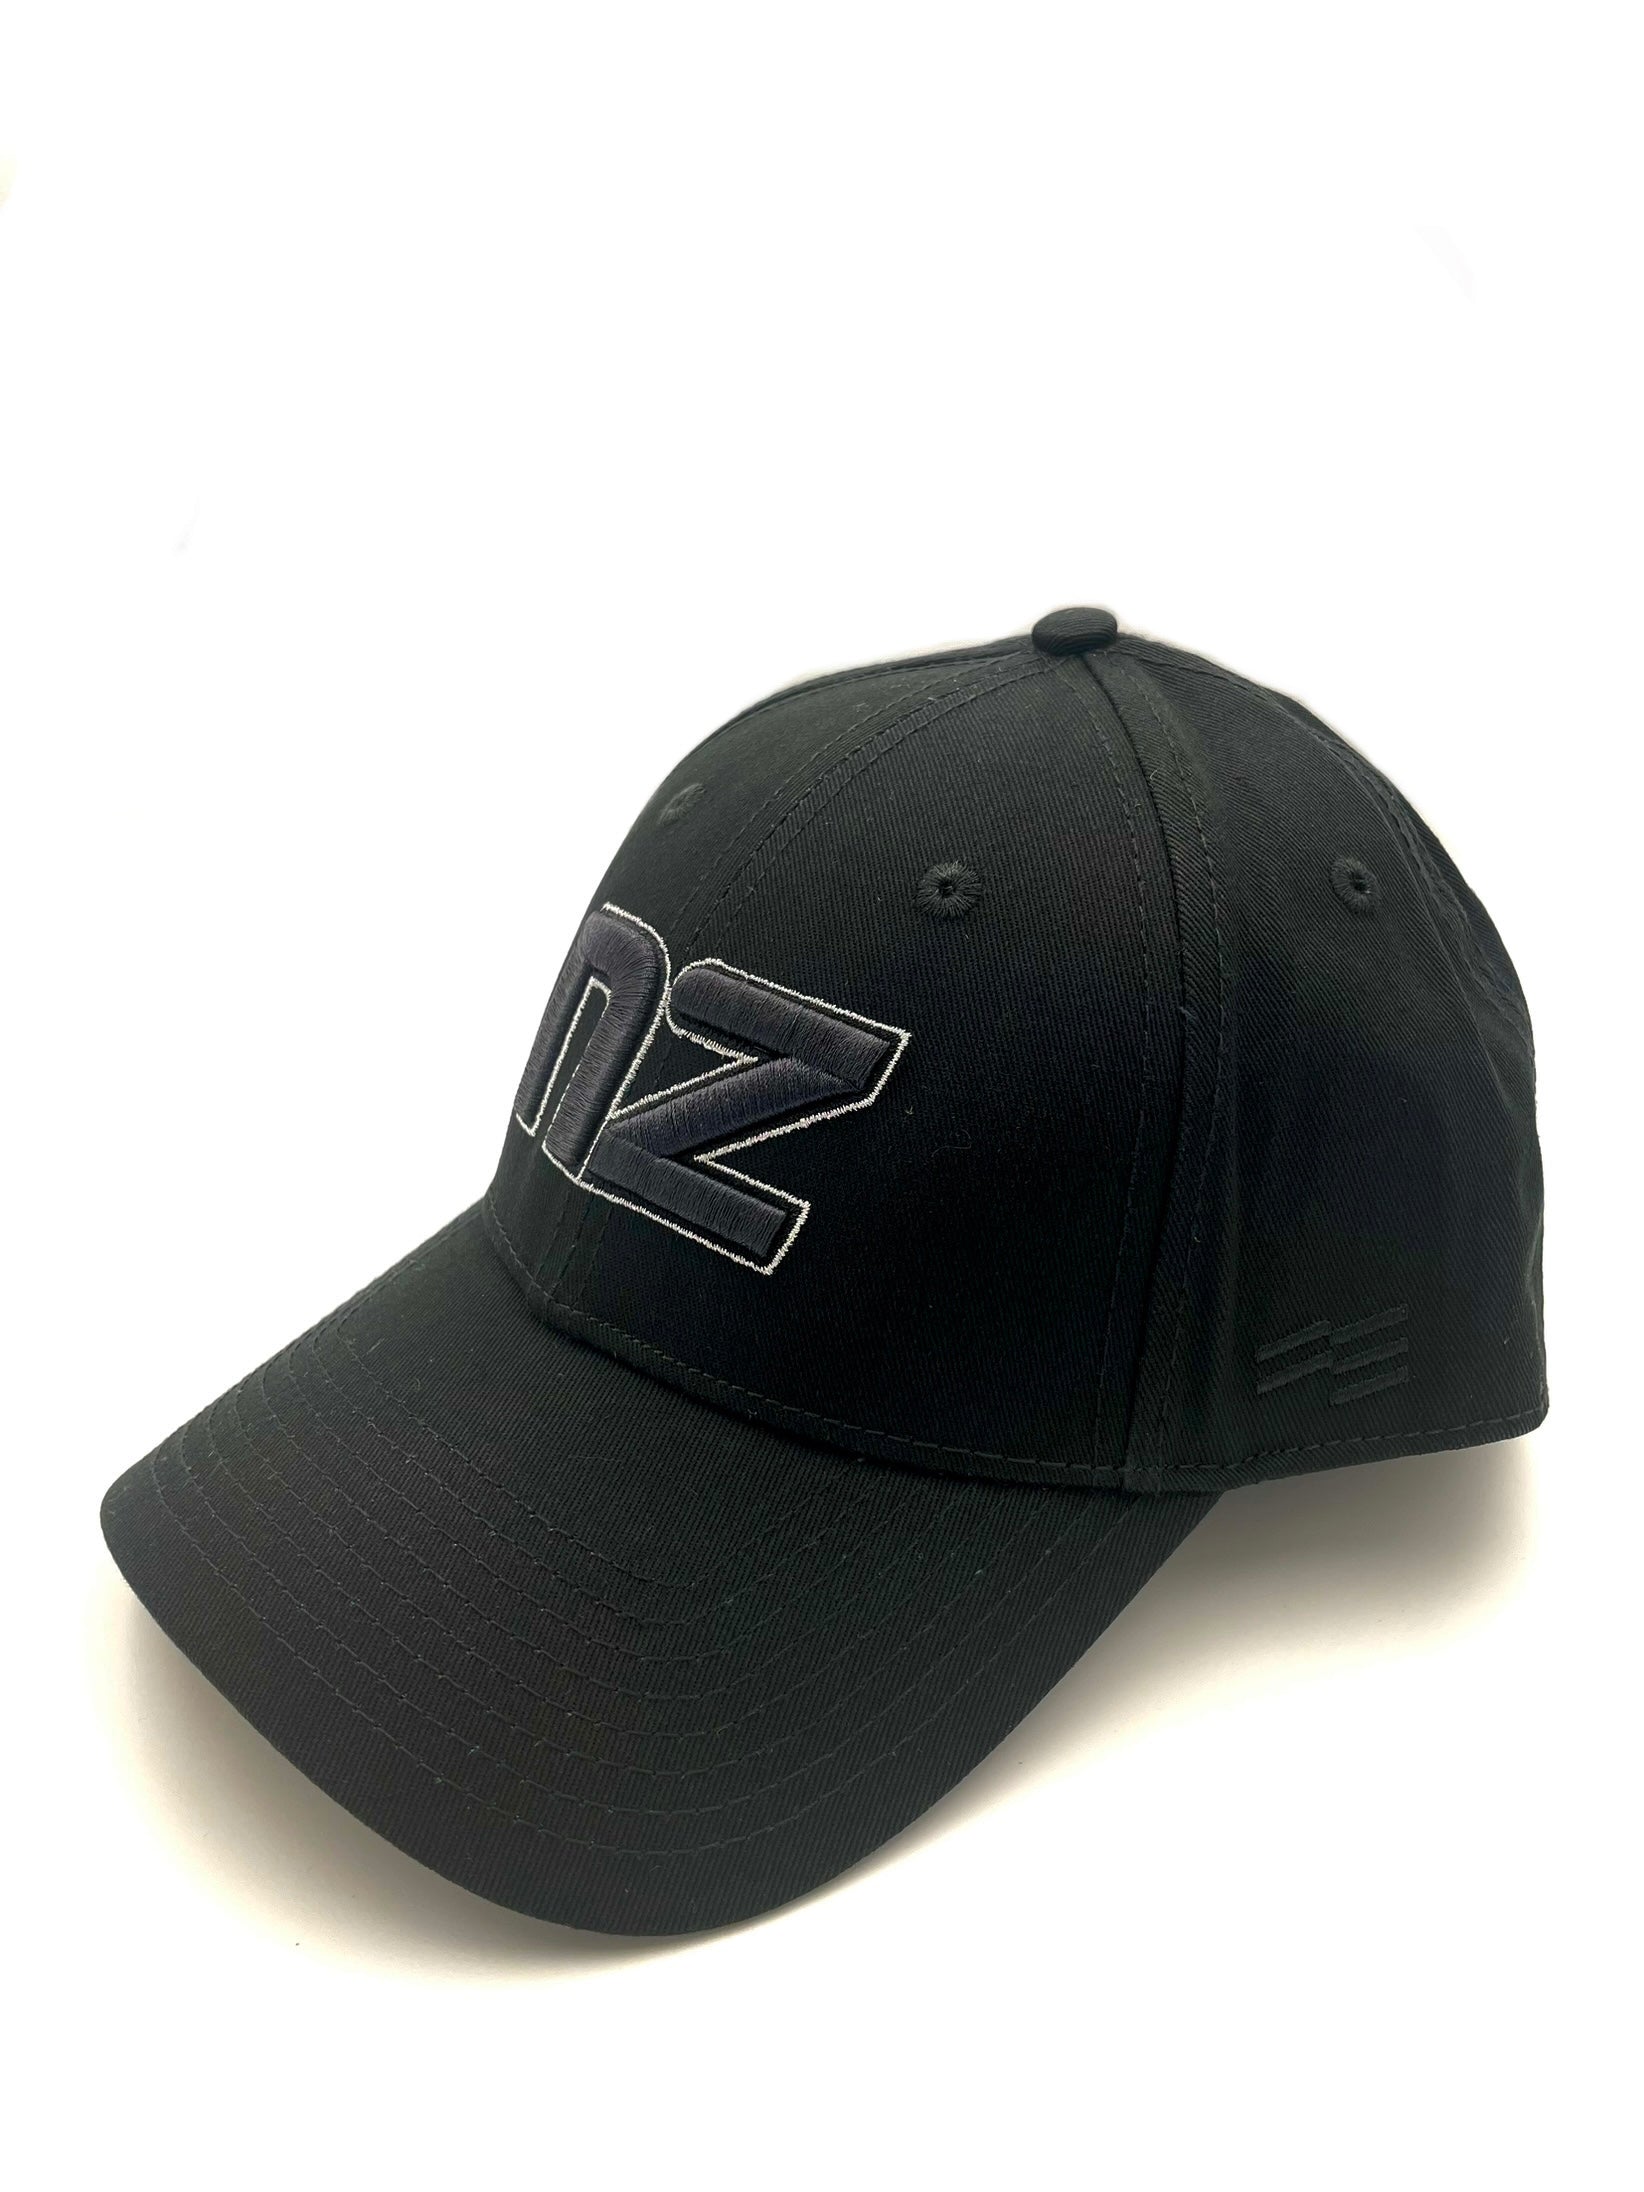 New Zealand Breakers Cap - Black On Black Premium Curved Snapback - First Ever